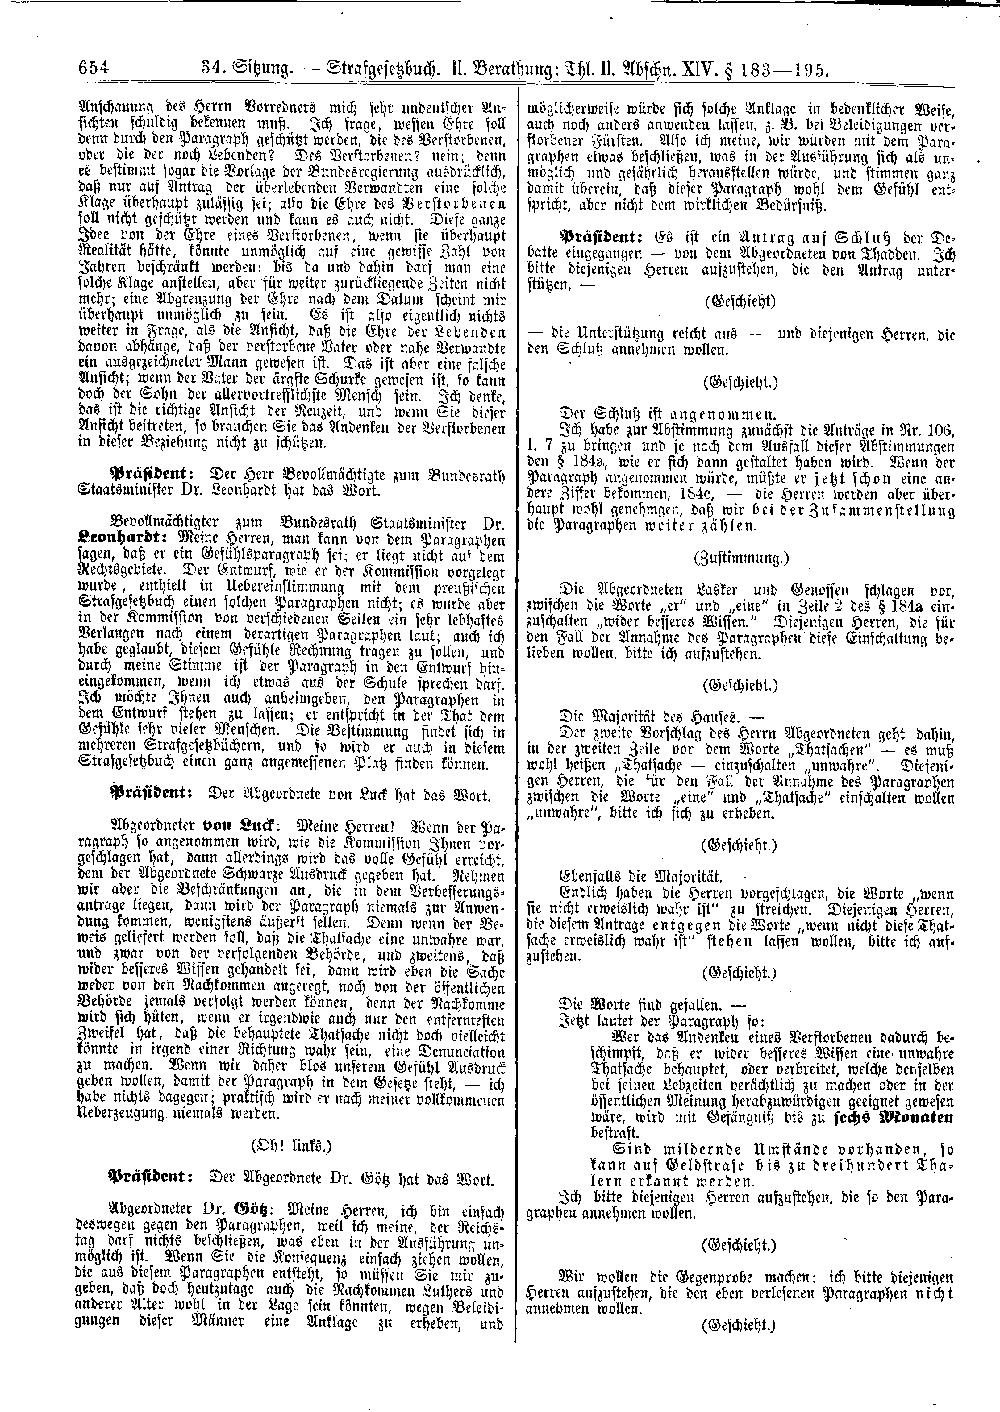 Scan of page 654